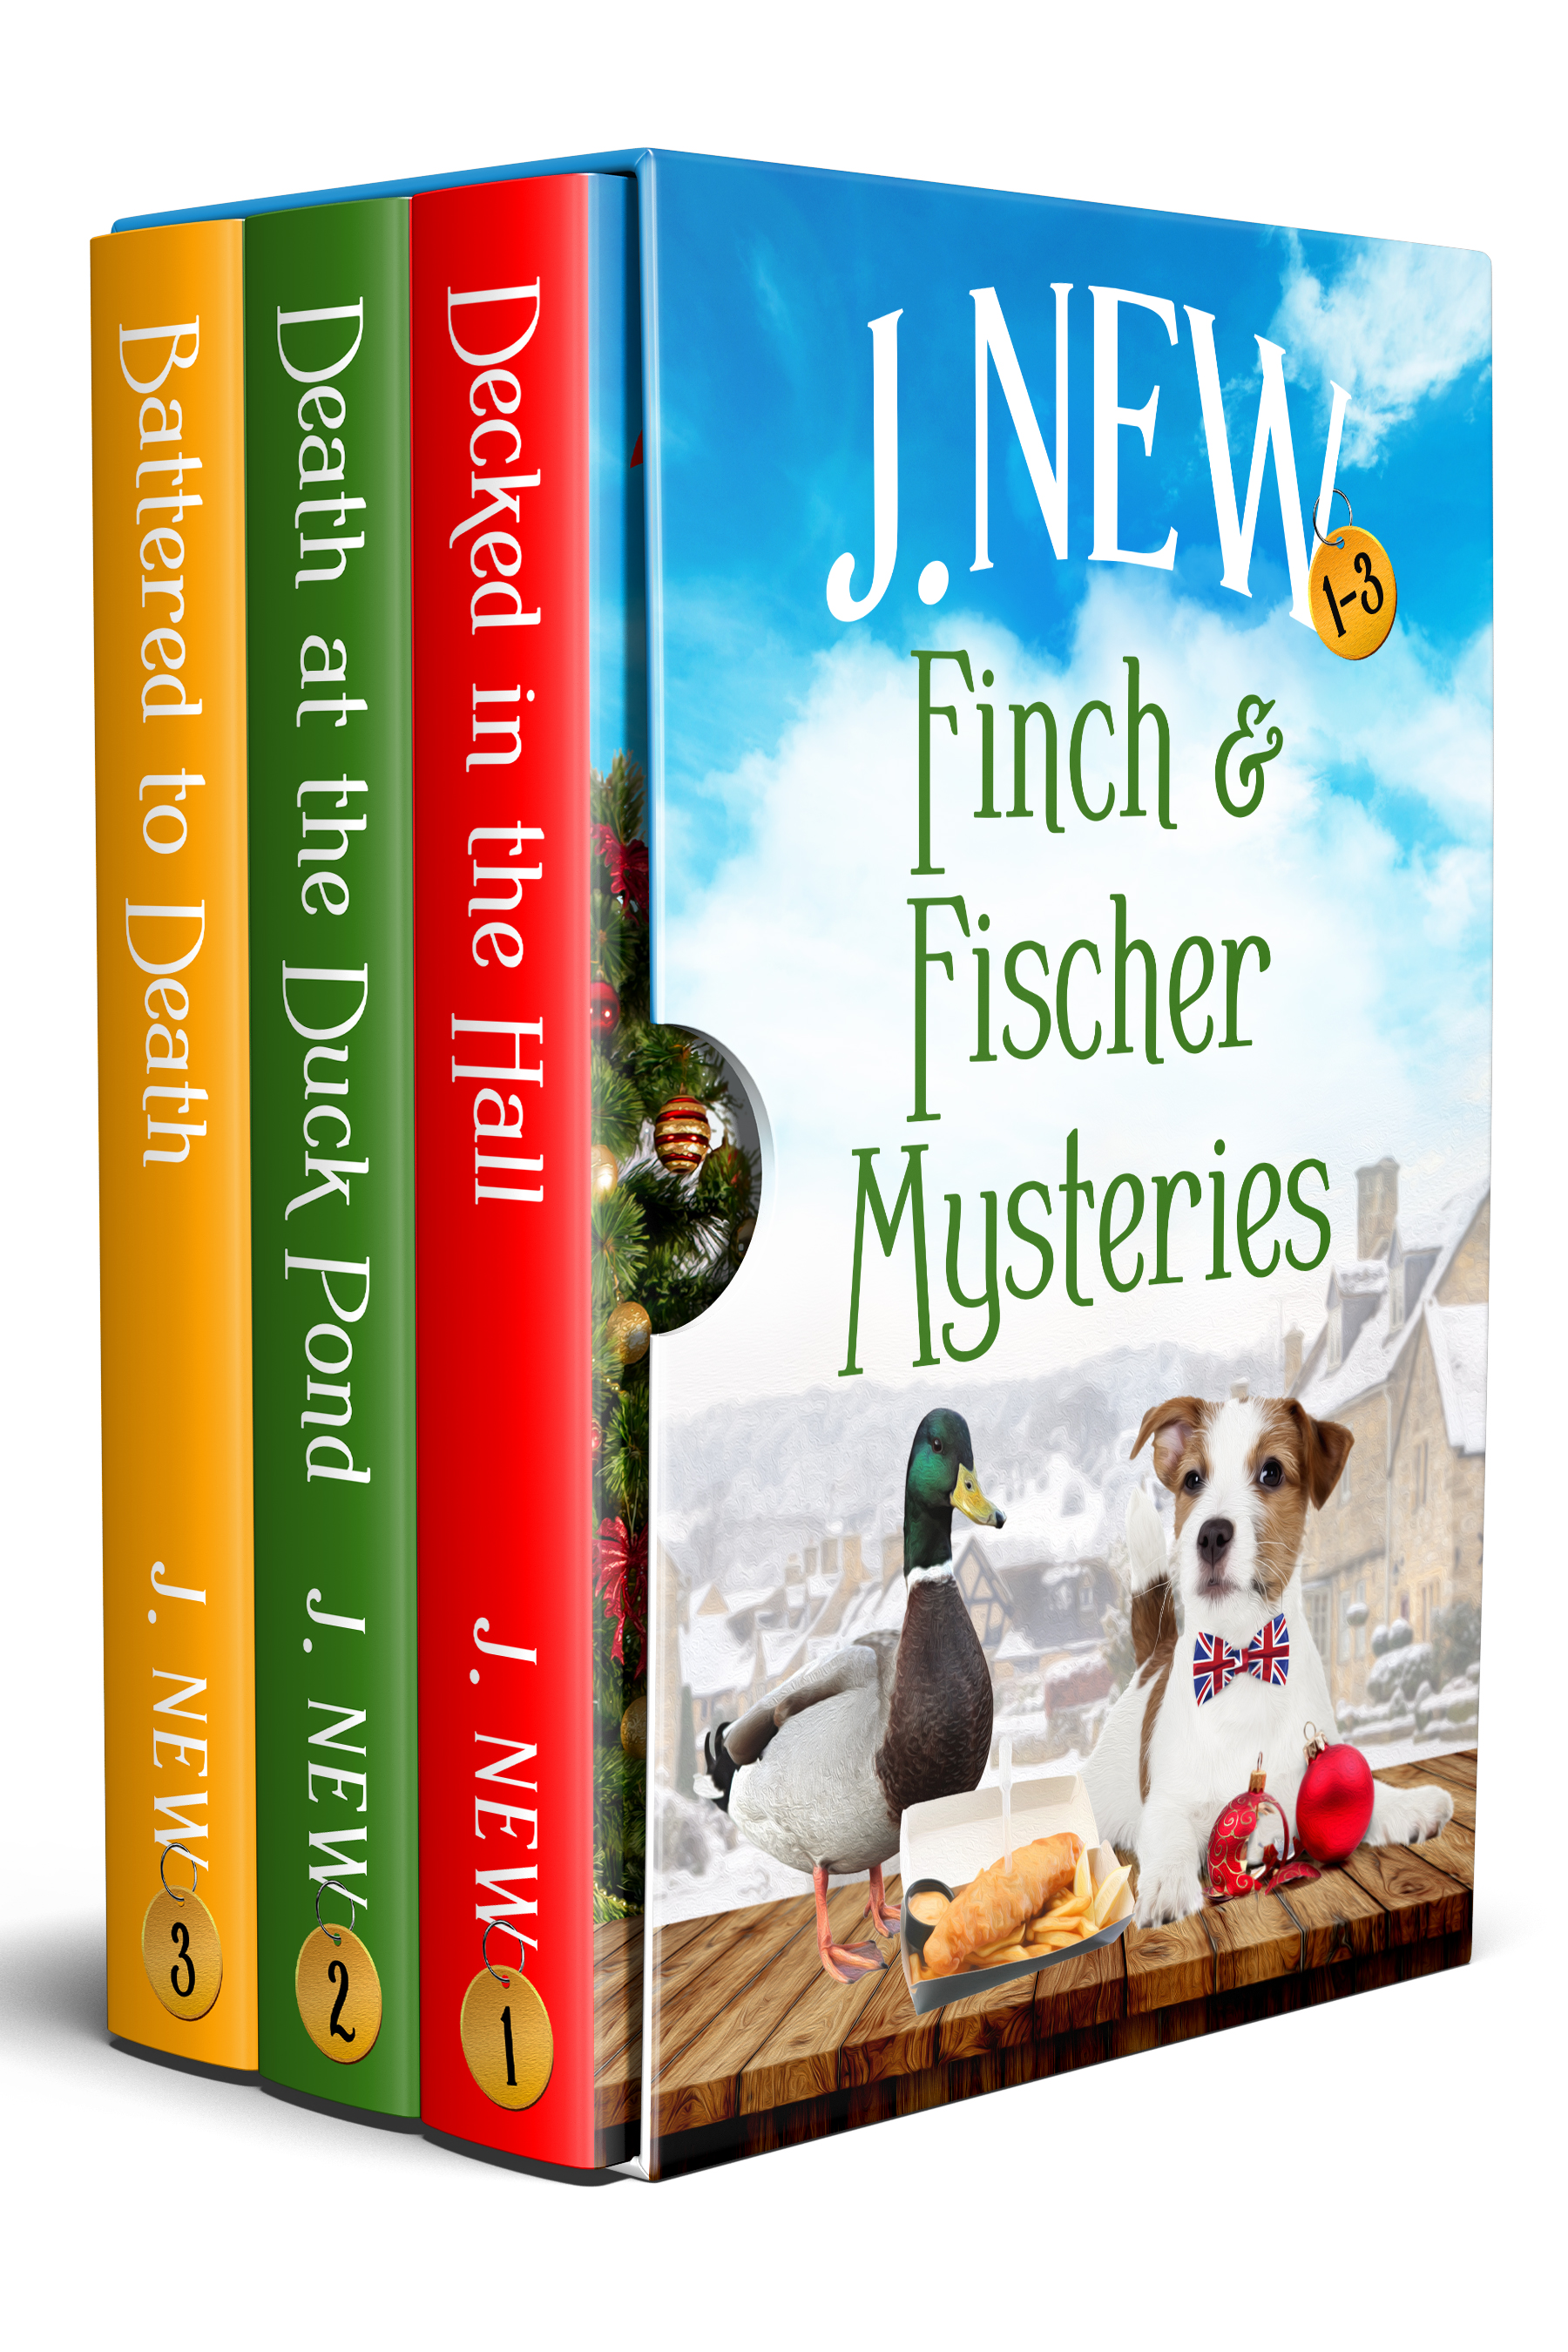 The first 3 books in the hugely popular British cozy mystery series featuring mobile librarian Penny Finch and her rescued pup Fischer, by British author J. New